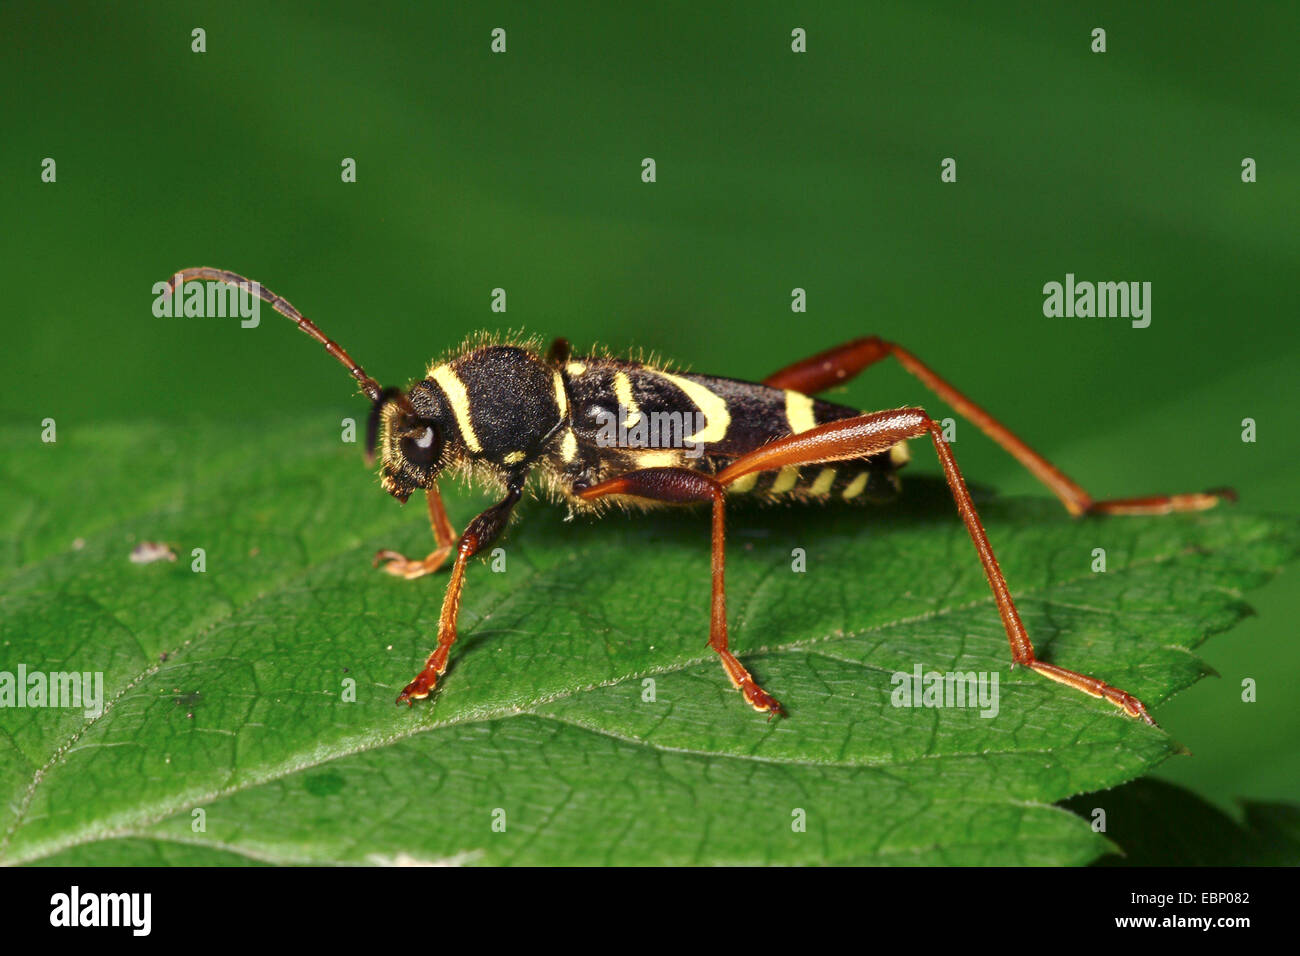 wasp beetle (Clytus arietis), on a leaf, Germany Stock Photo